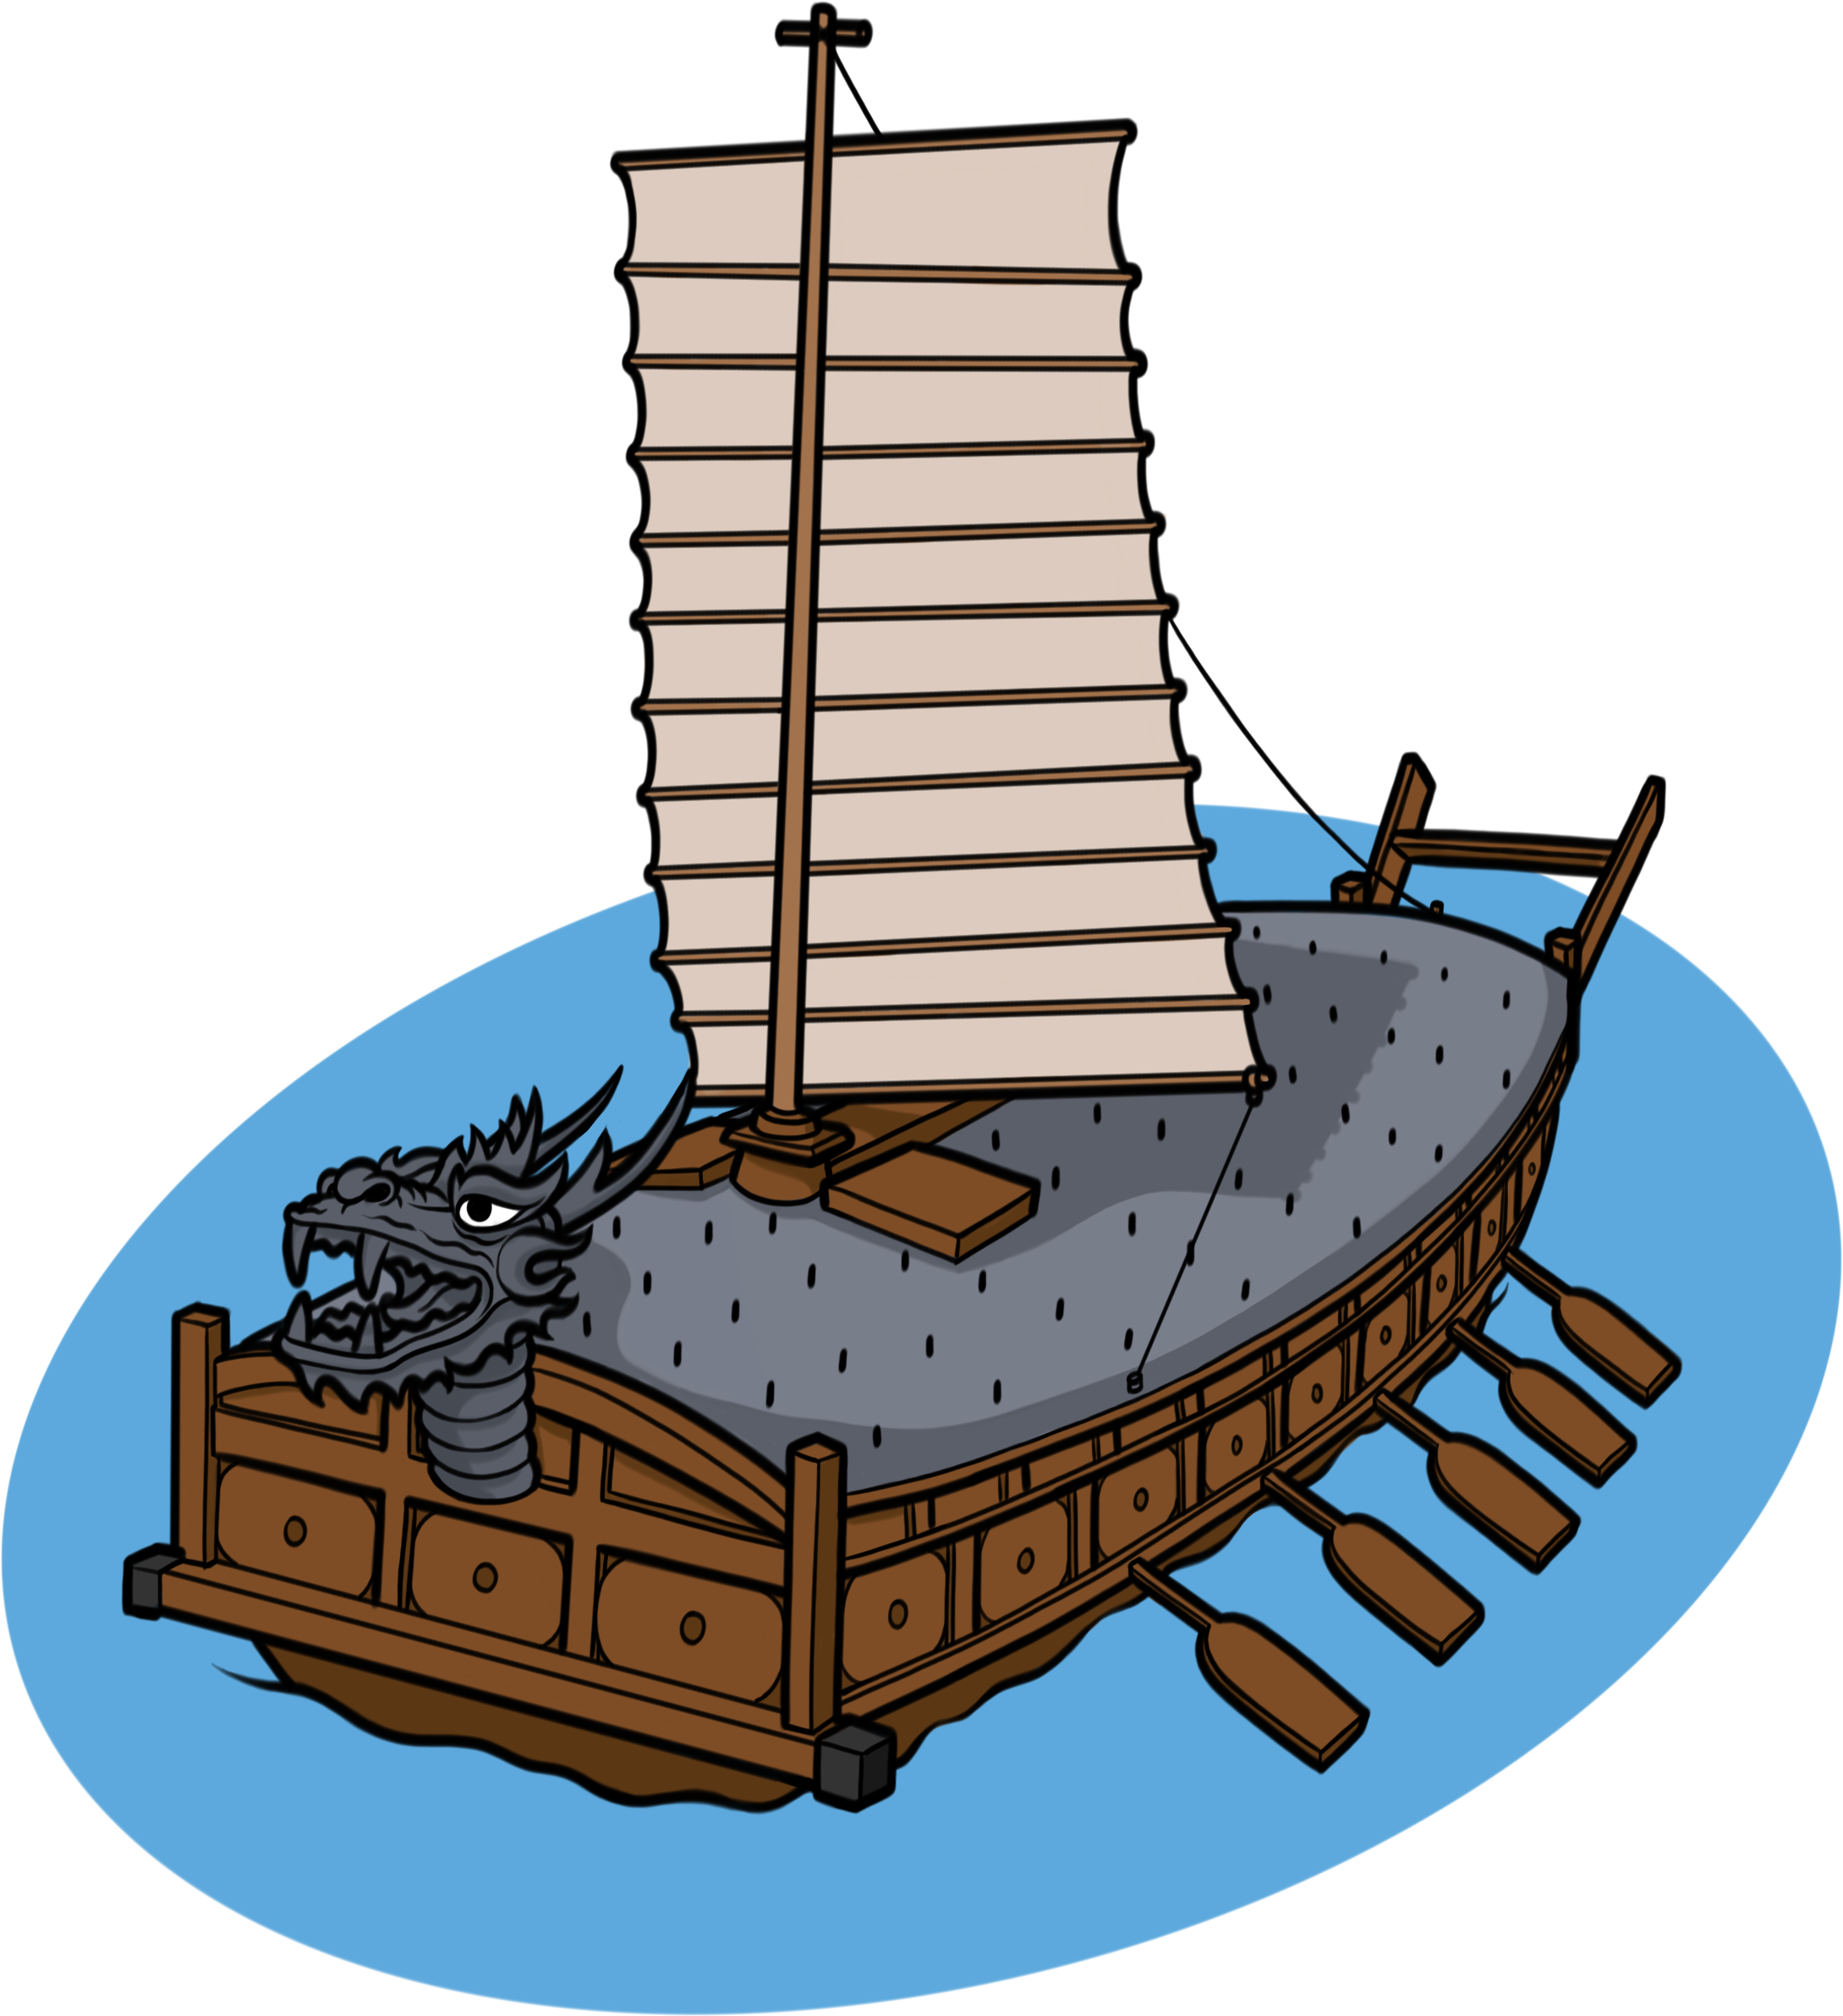 A Turtle Boat Is Made Of Thick Wood With A Flat Bottom - Ship Model (2179x2383)